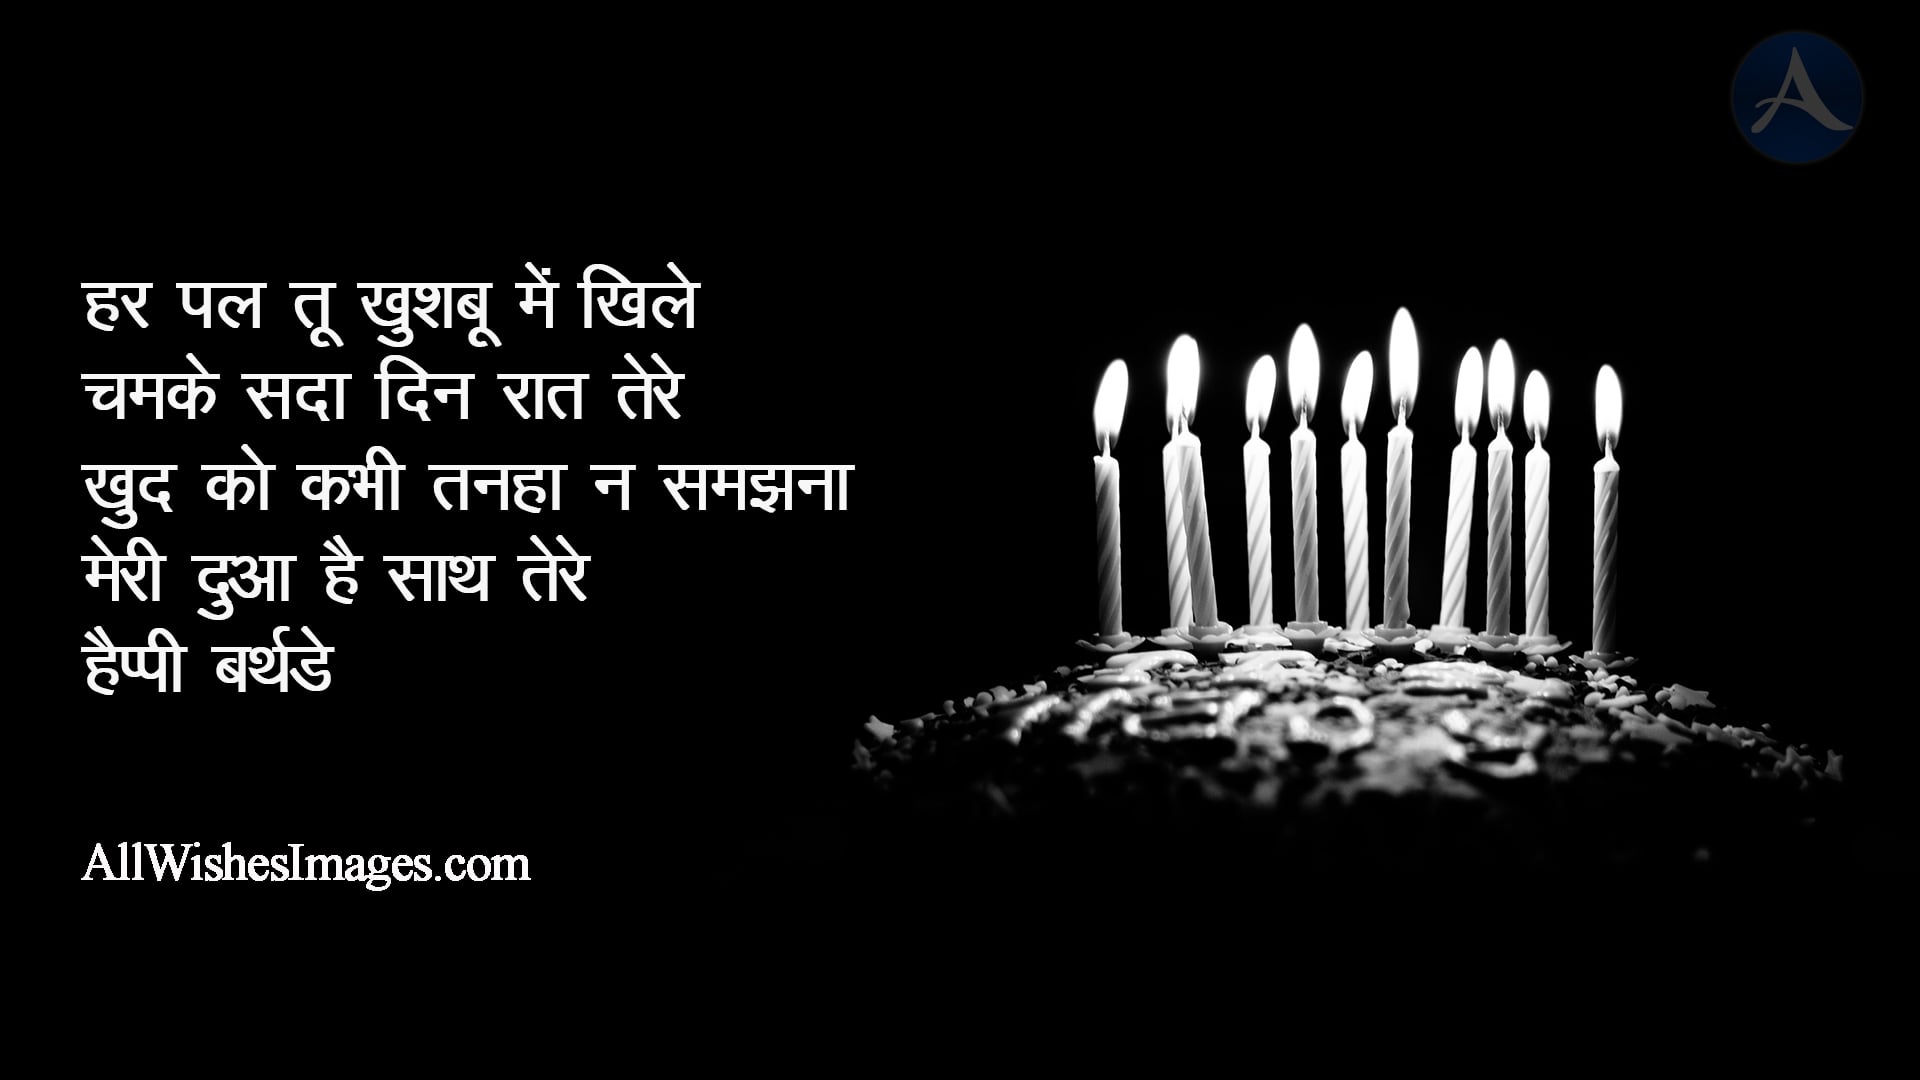 Happy Birthday Wishes In Hindi - All Wishes Images - Images for WhatsApp